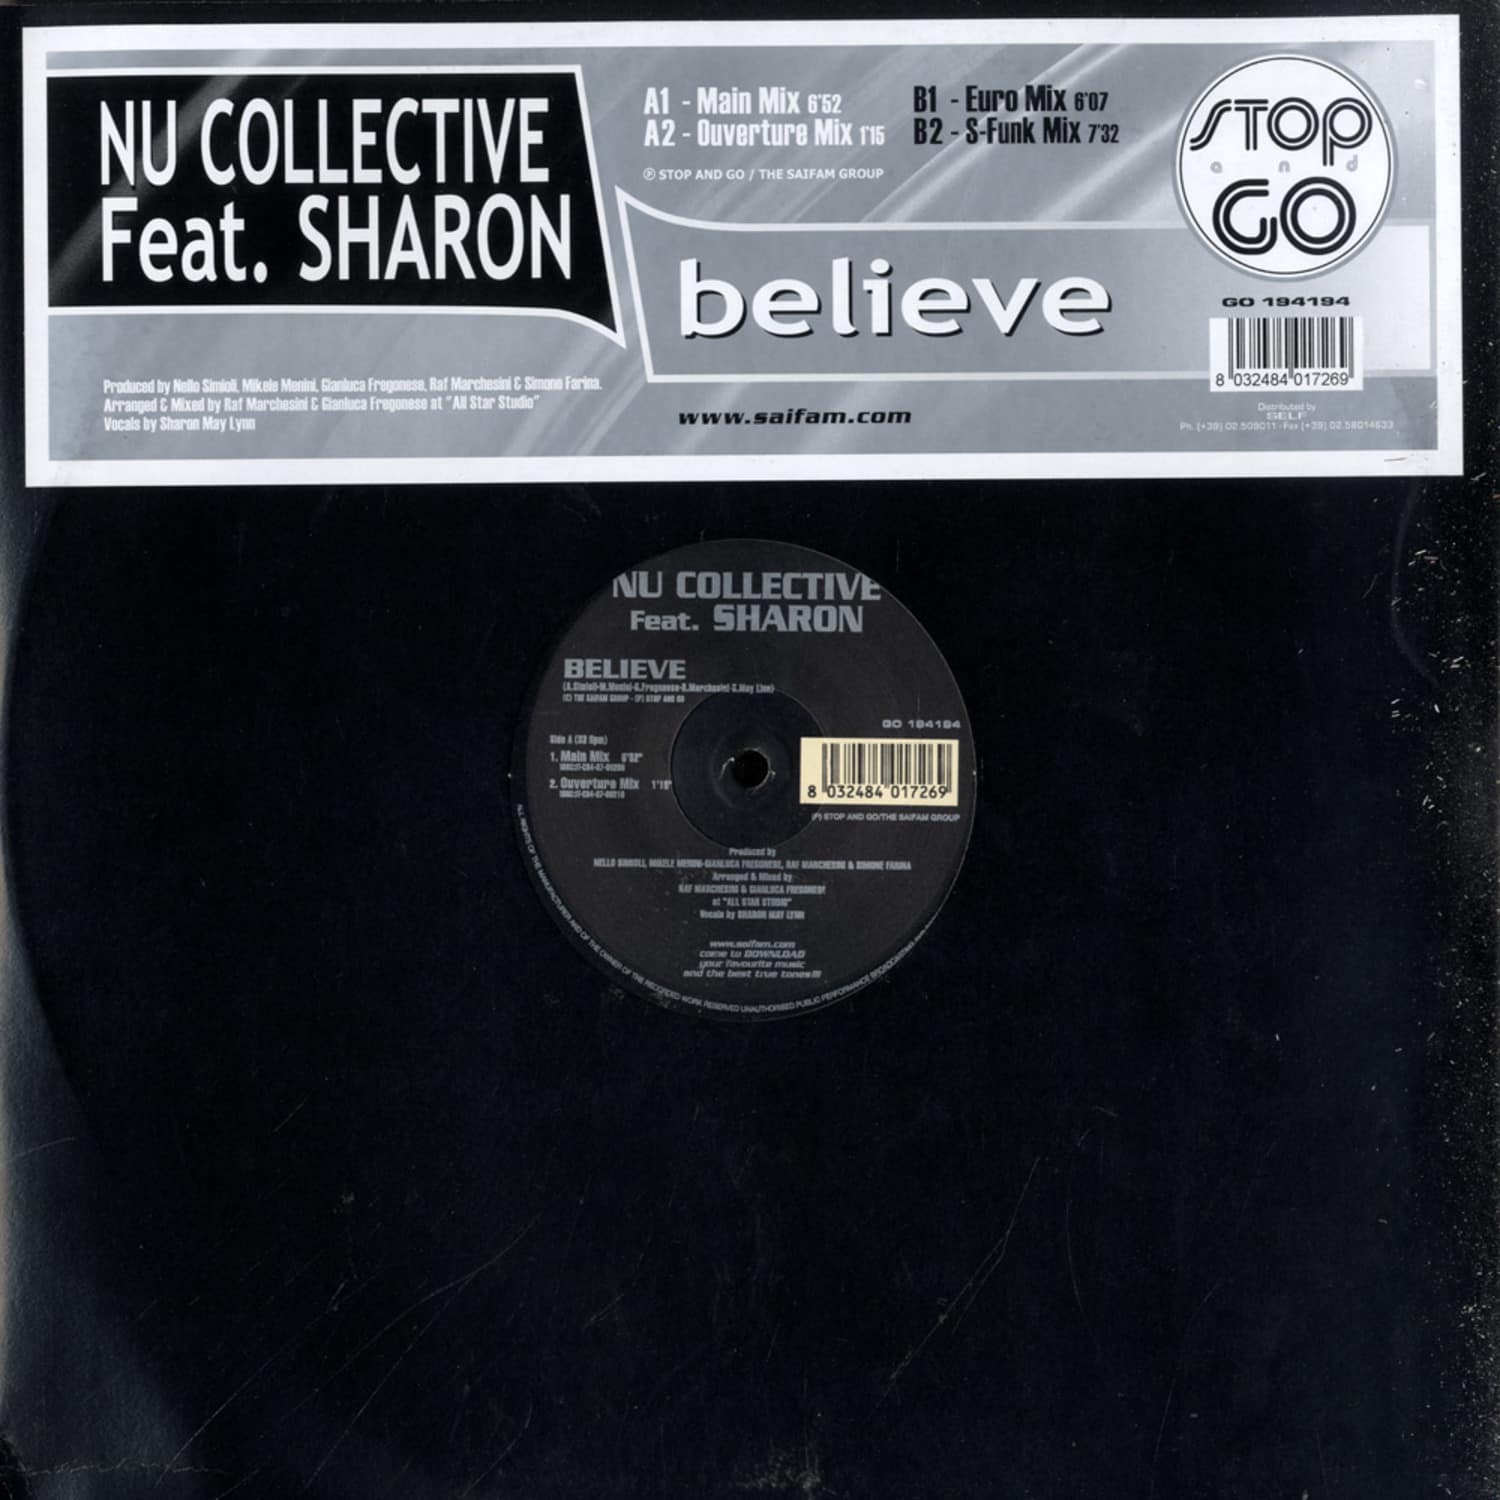 Nu Collective feat. Sharon - BELIEVE